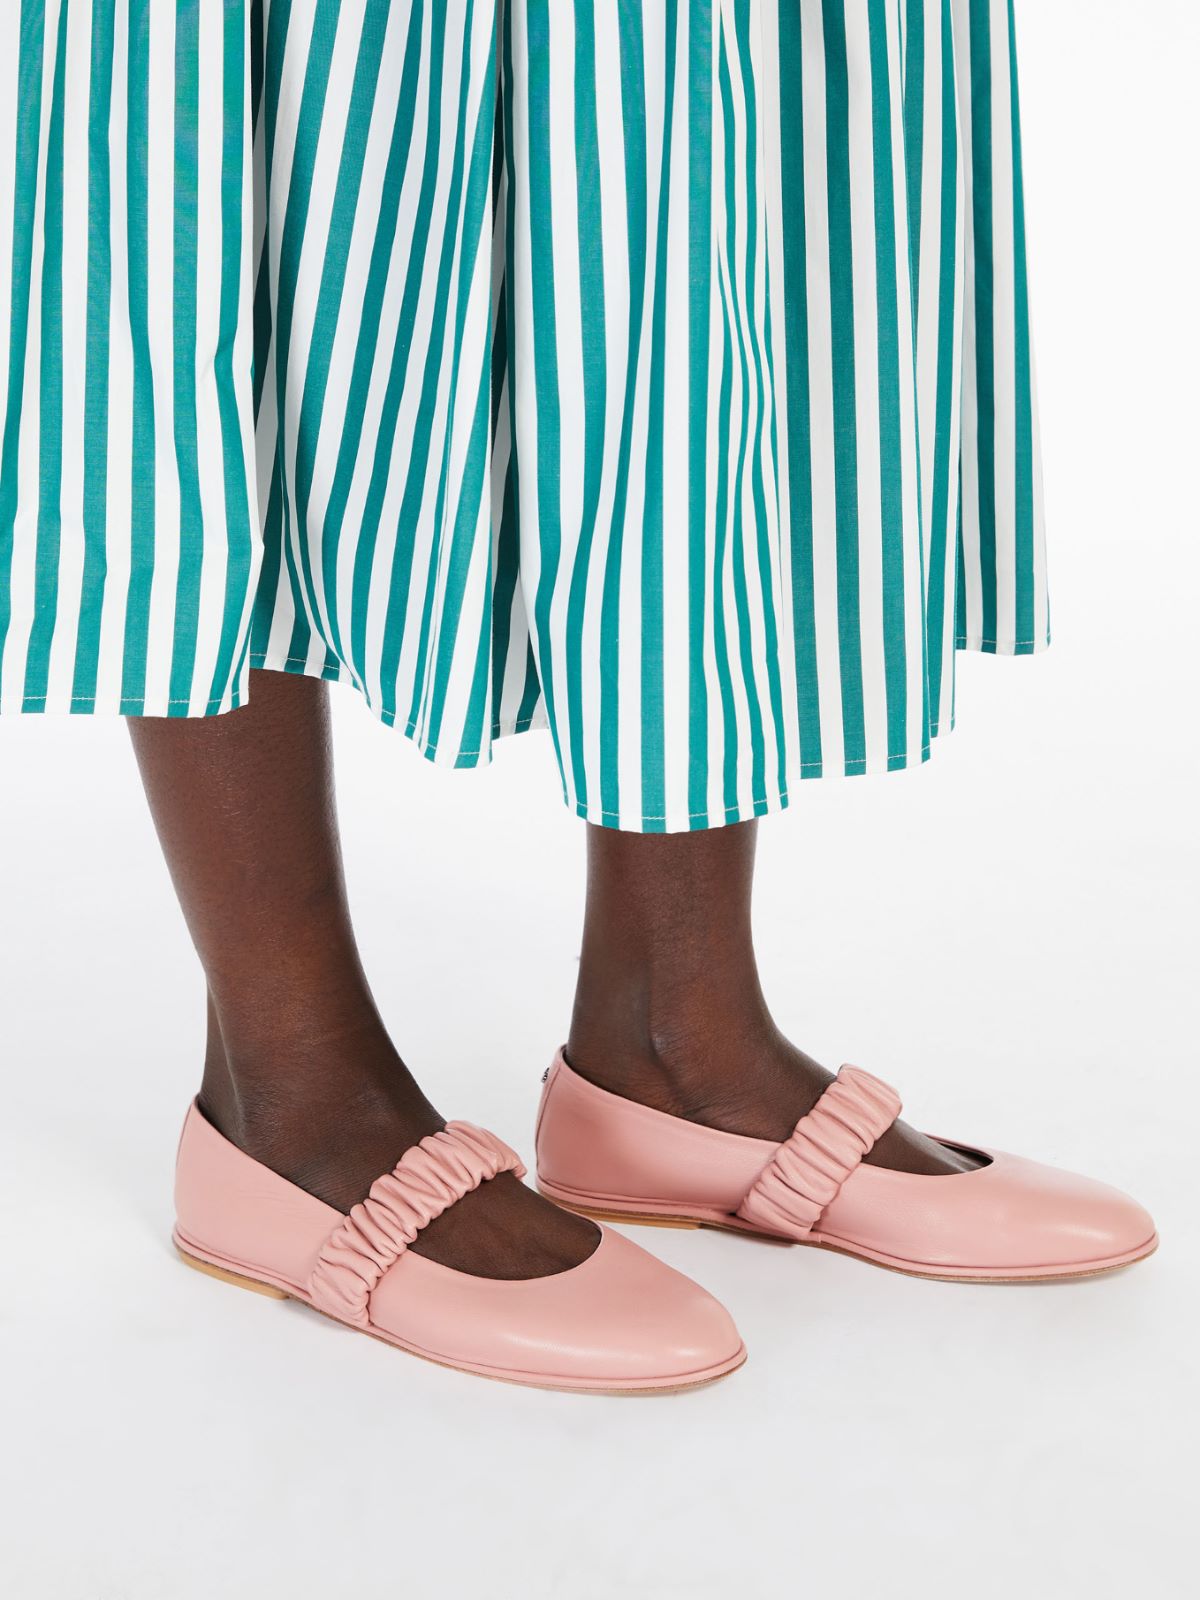 Ballet flats in nappa leather - ANTIQUE ROSE - Weekend Max Mara - 6